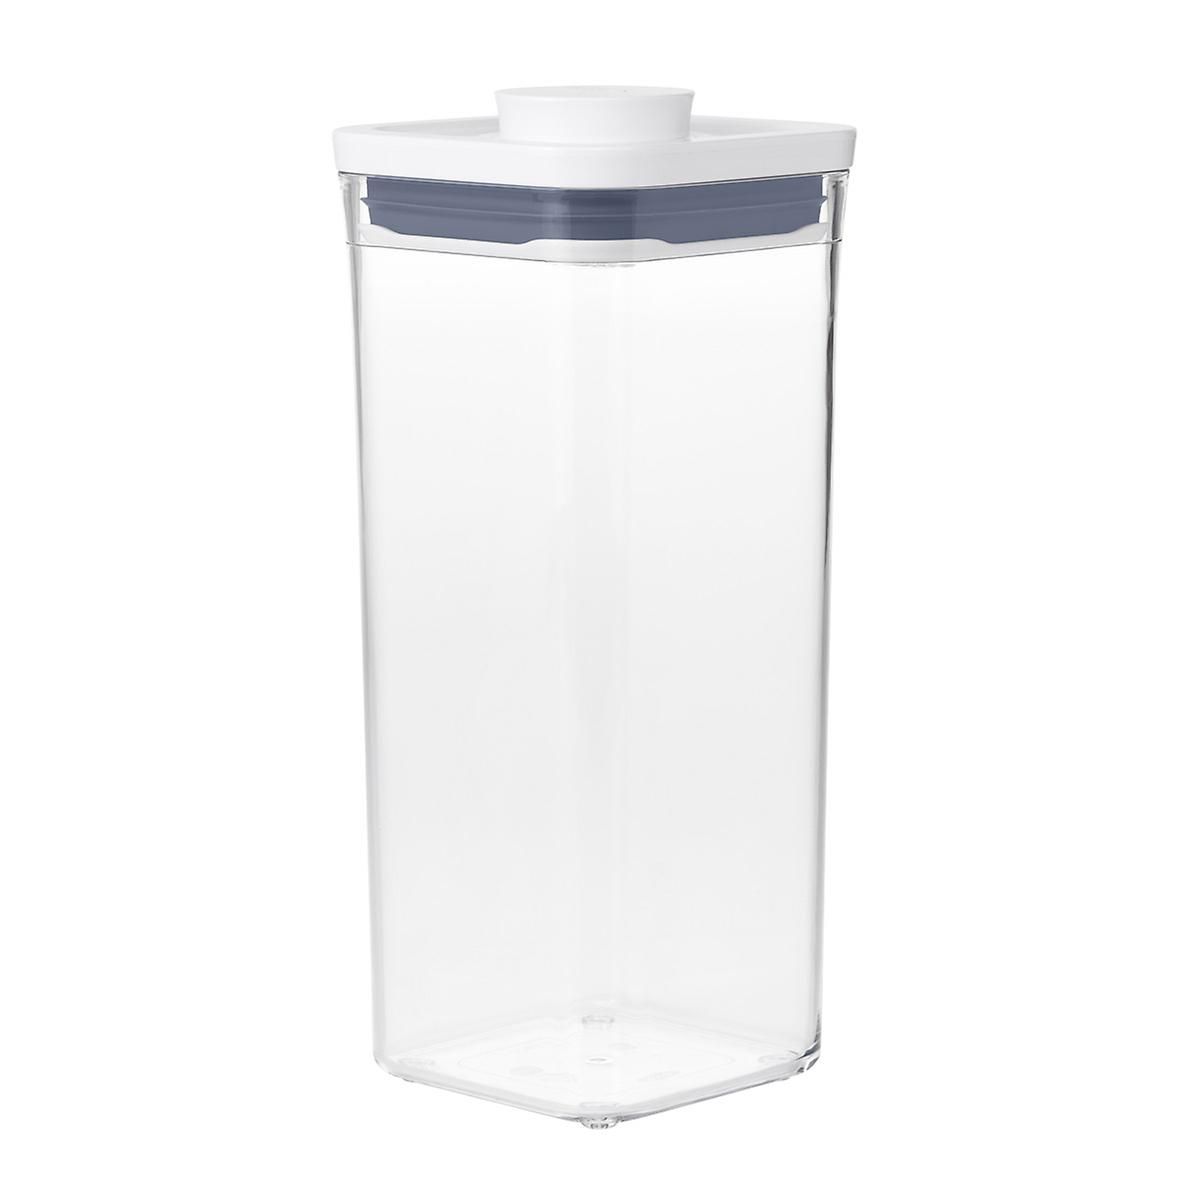 OXO 2.3 qt. Tall Small Square POP Container | The Container Store